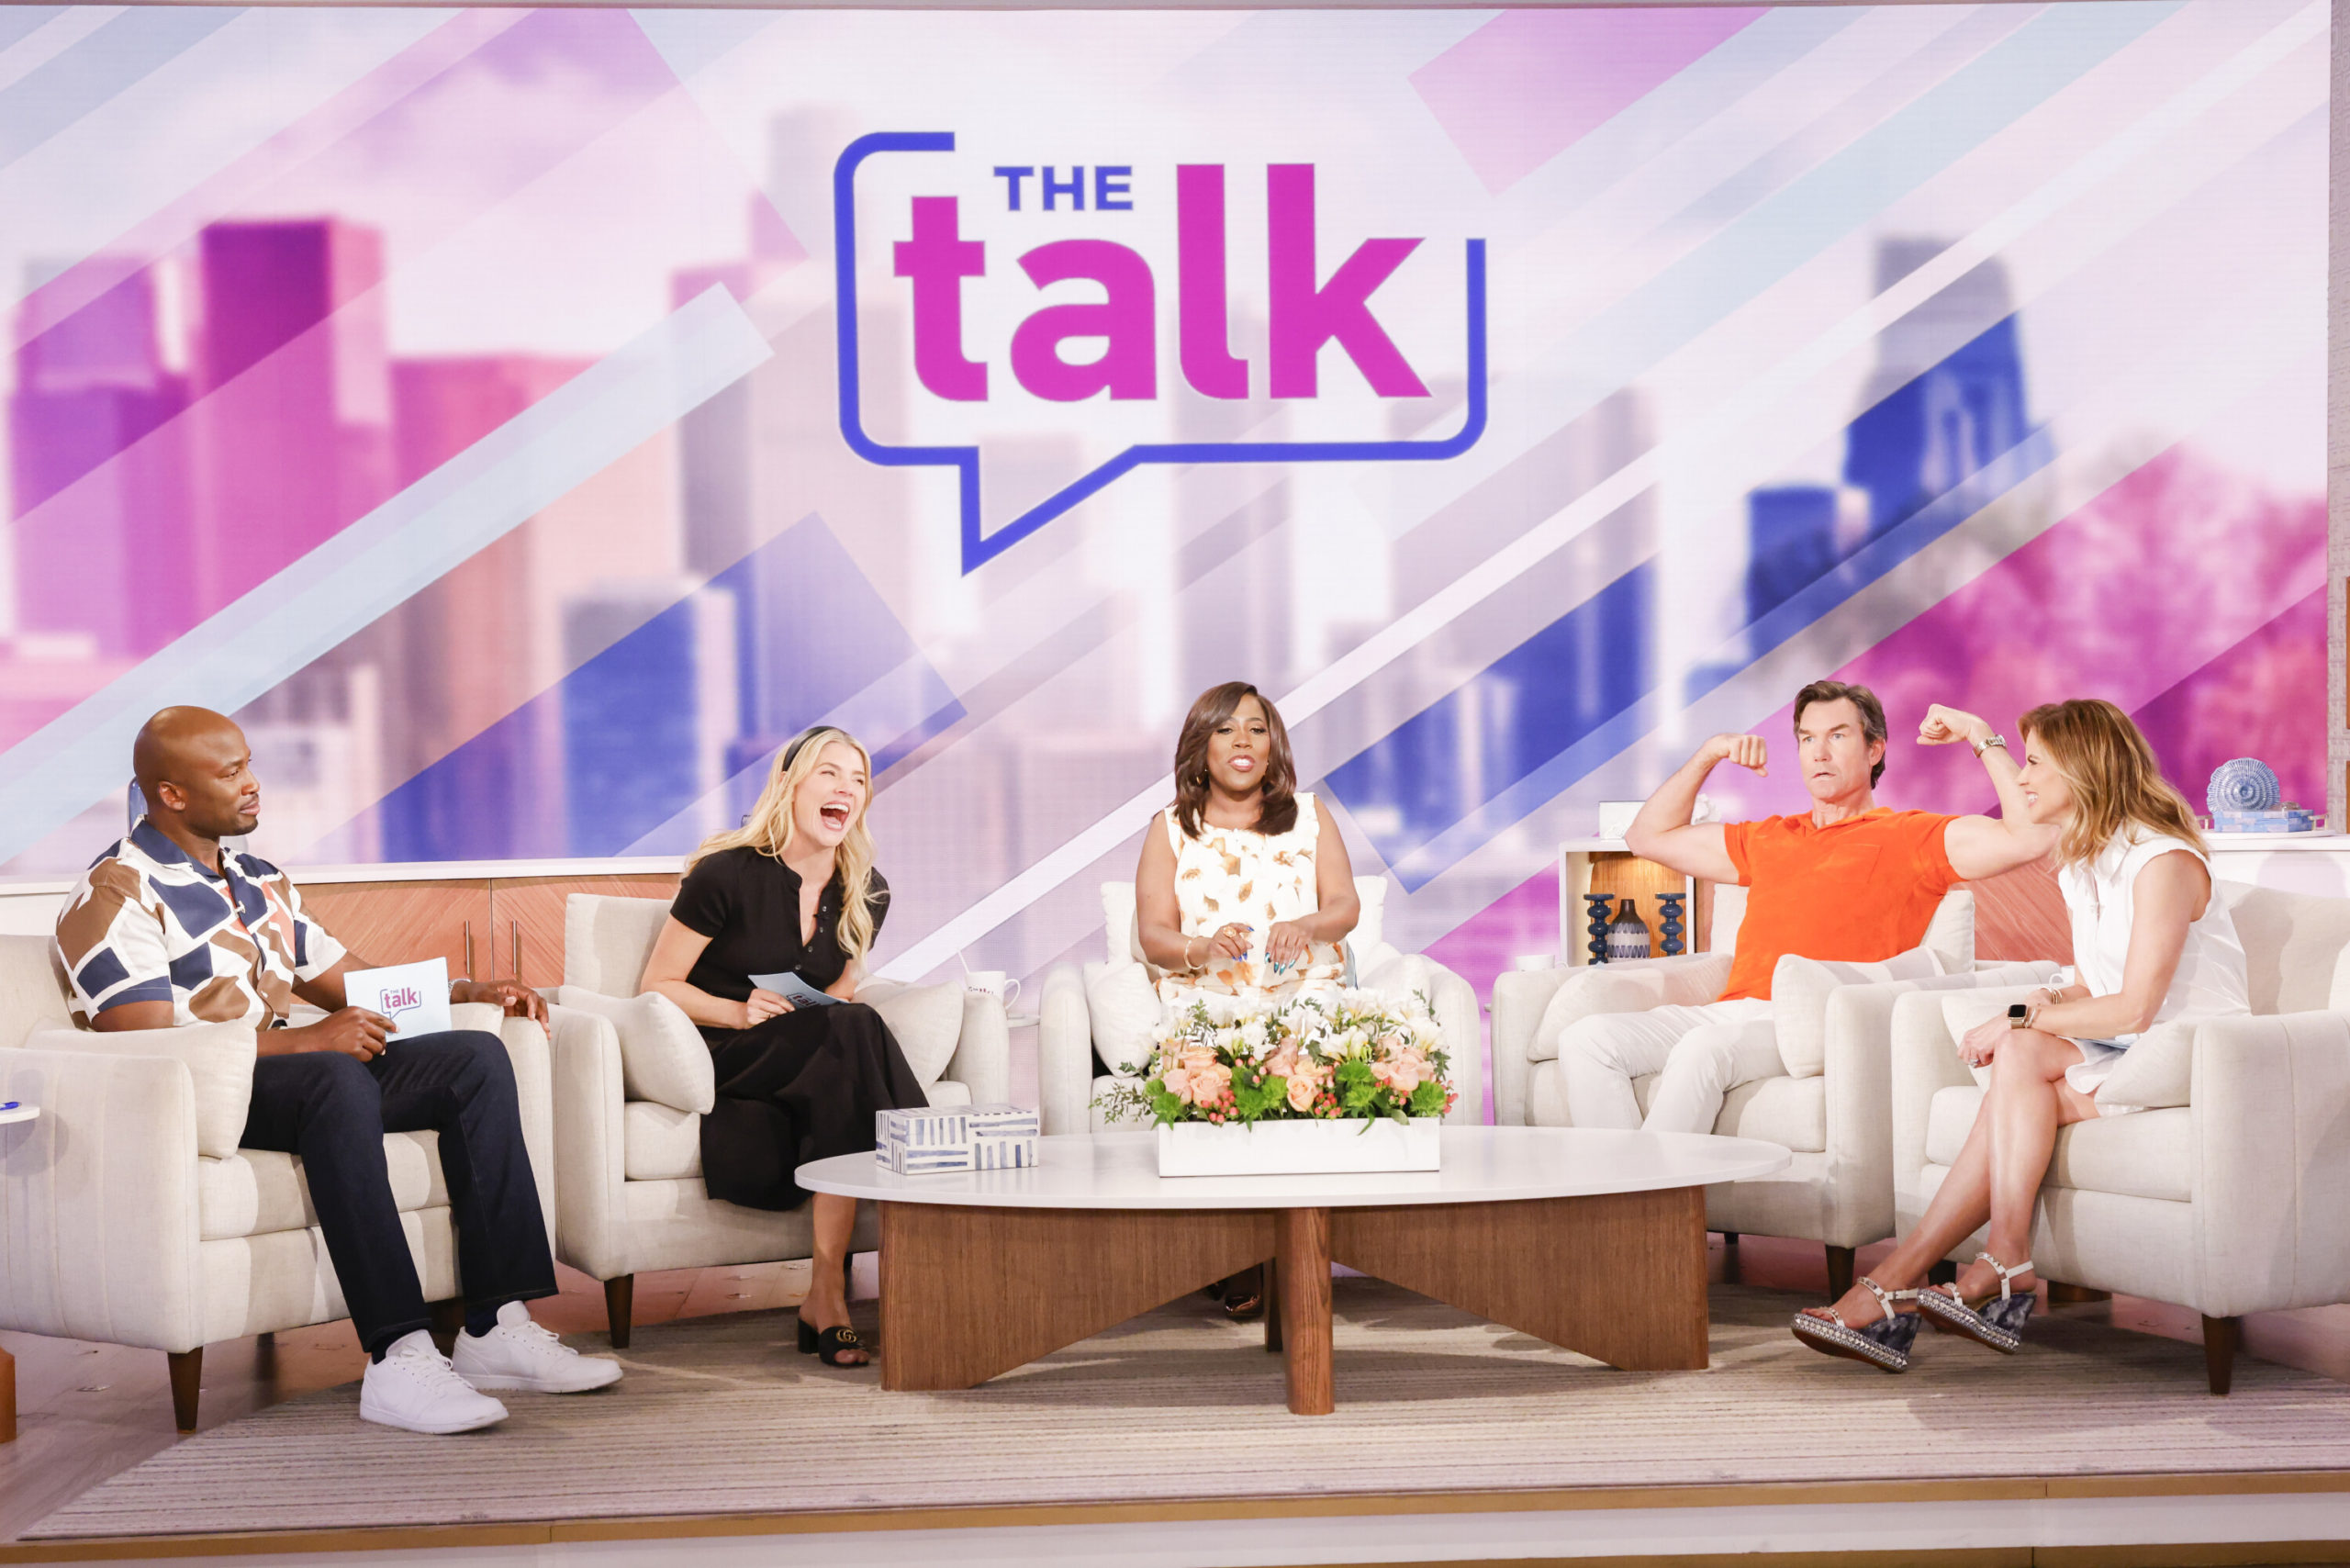 #The Talk: Cancelled, CBS Daytime Series Ending This Year with Abbreviated 15th Season